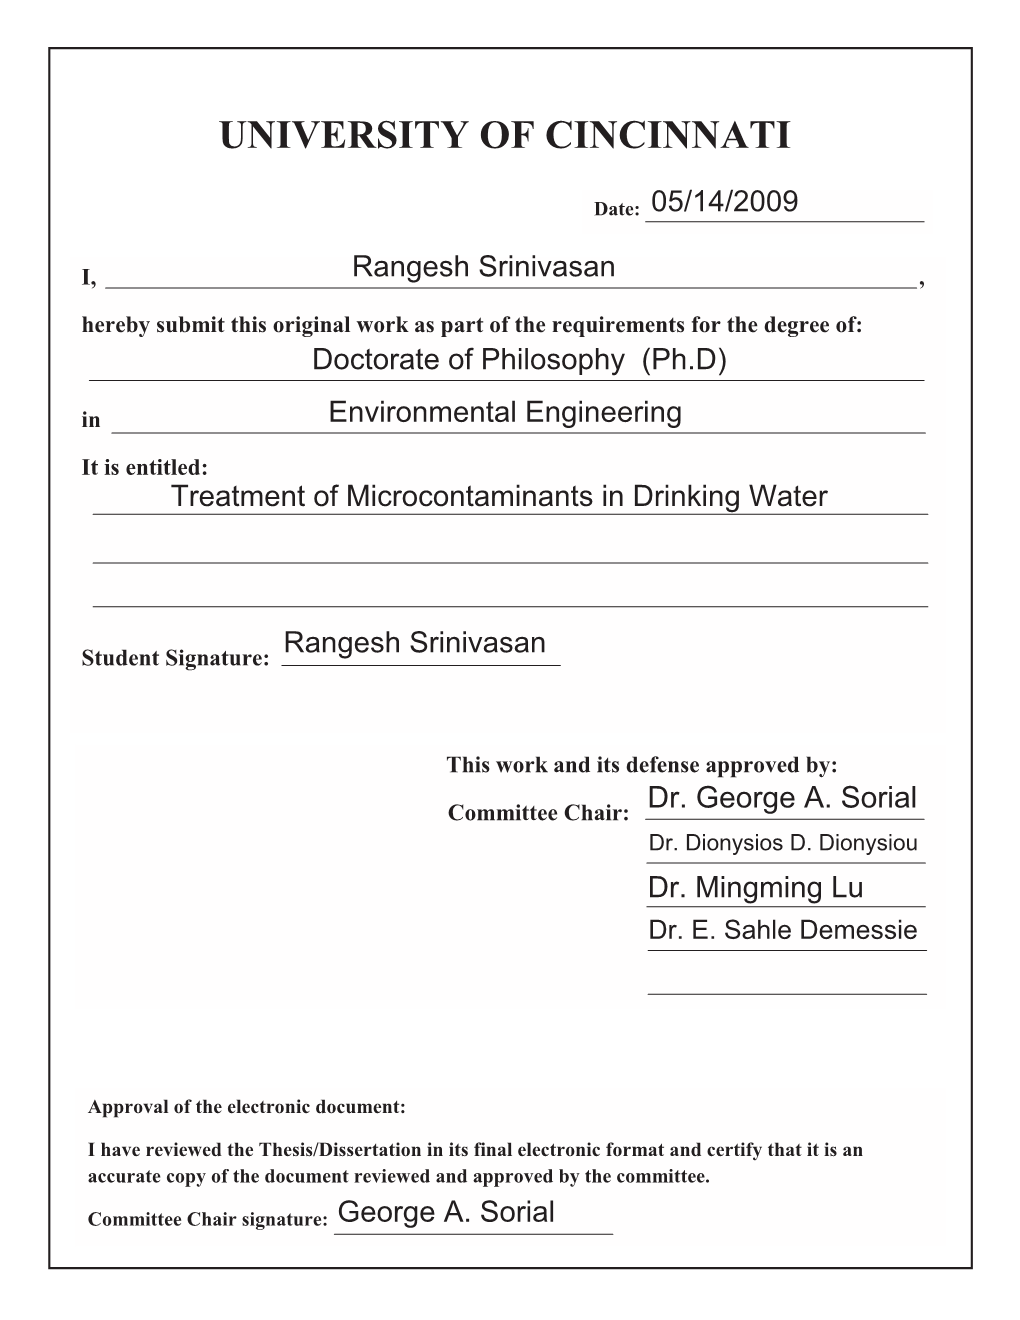 Treatment of Microcontaminants in Drinking Water